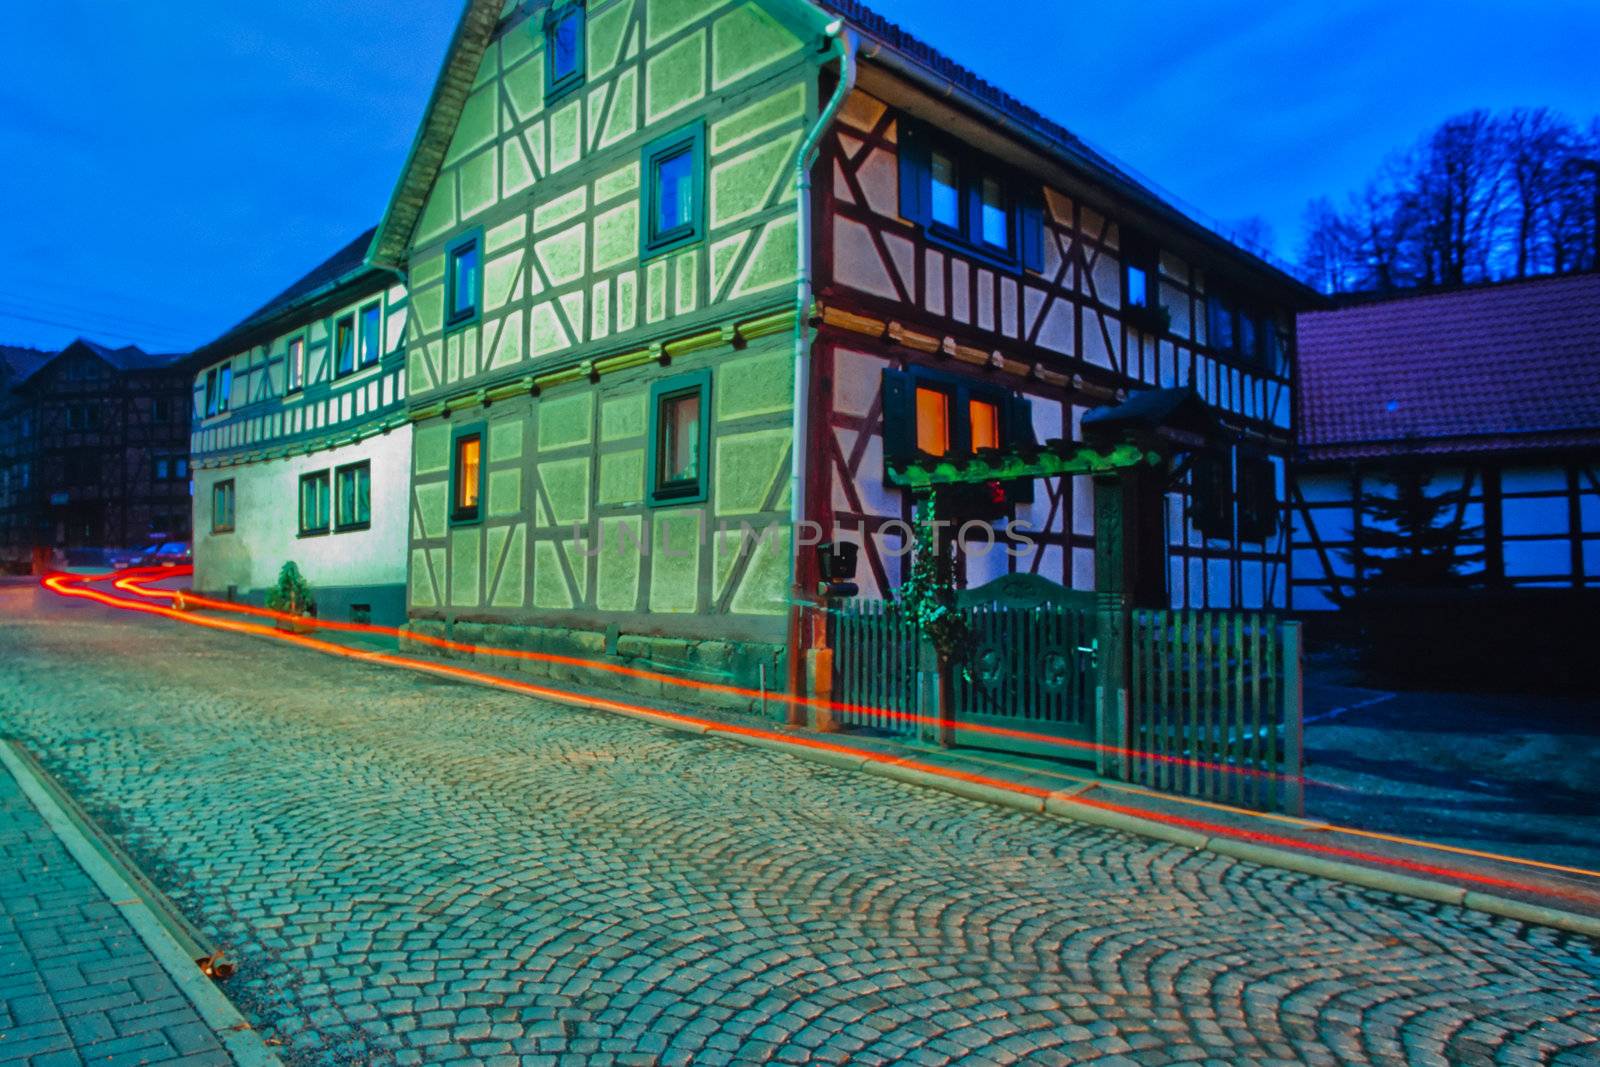 At night in Thuringia village, Germay by PiLens